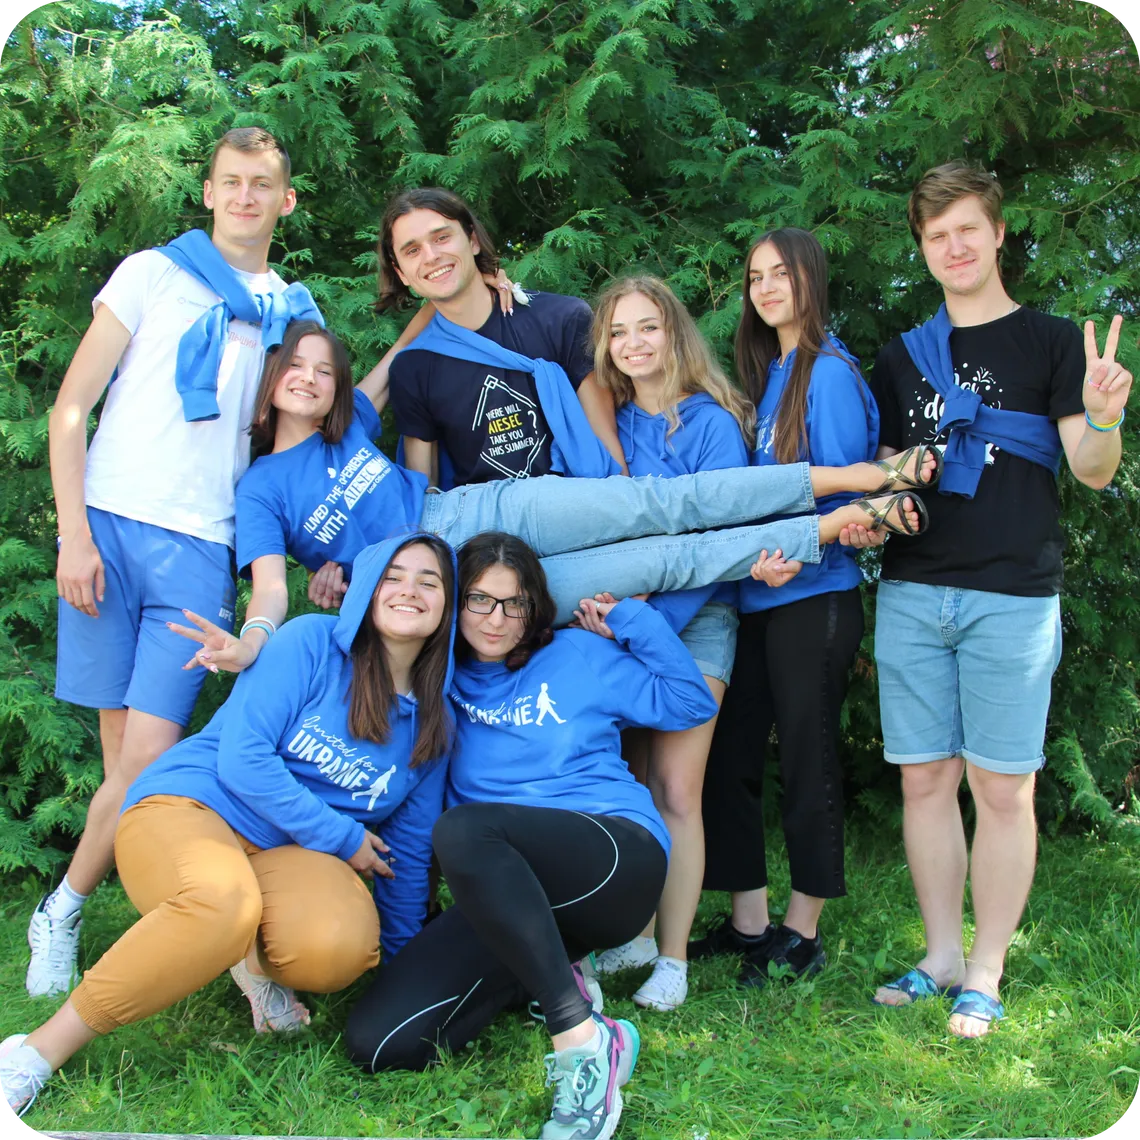 AIESEC invites youth to be part of their team